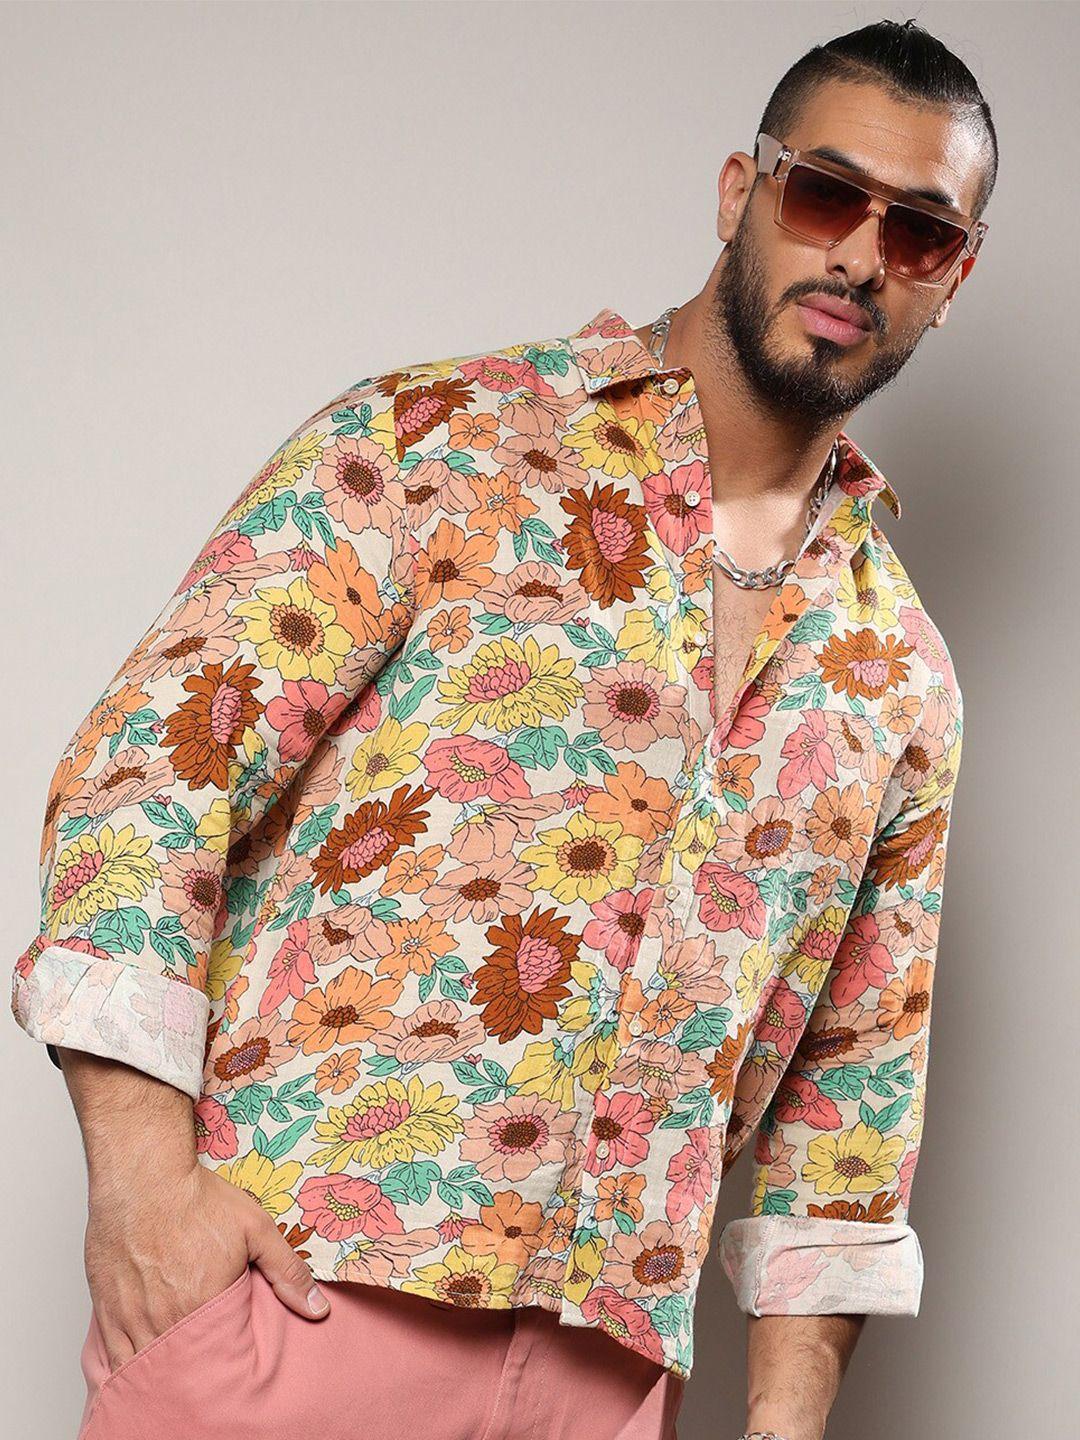 instafab-plus-classic-floral-printed-spread-collar-cotton-casual-shirt